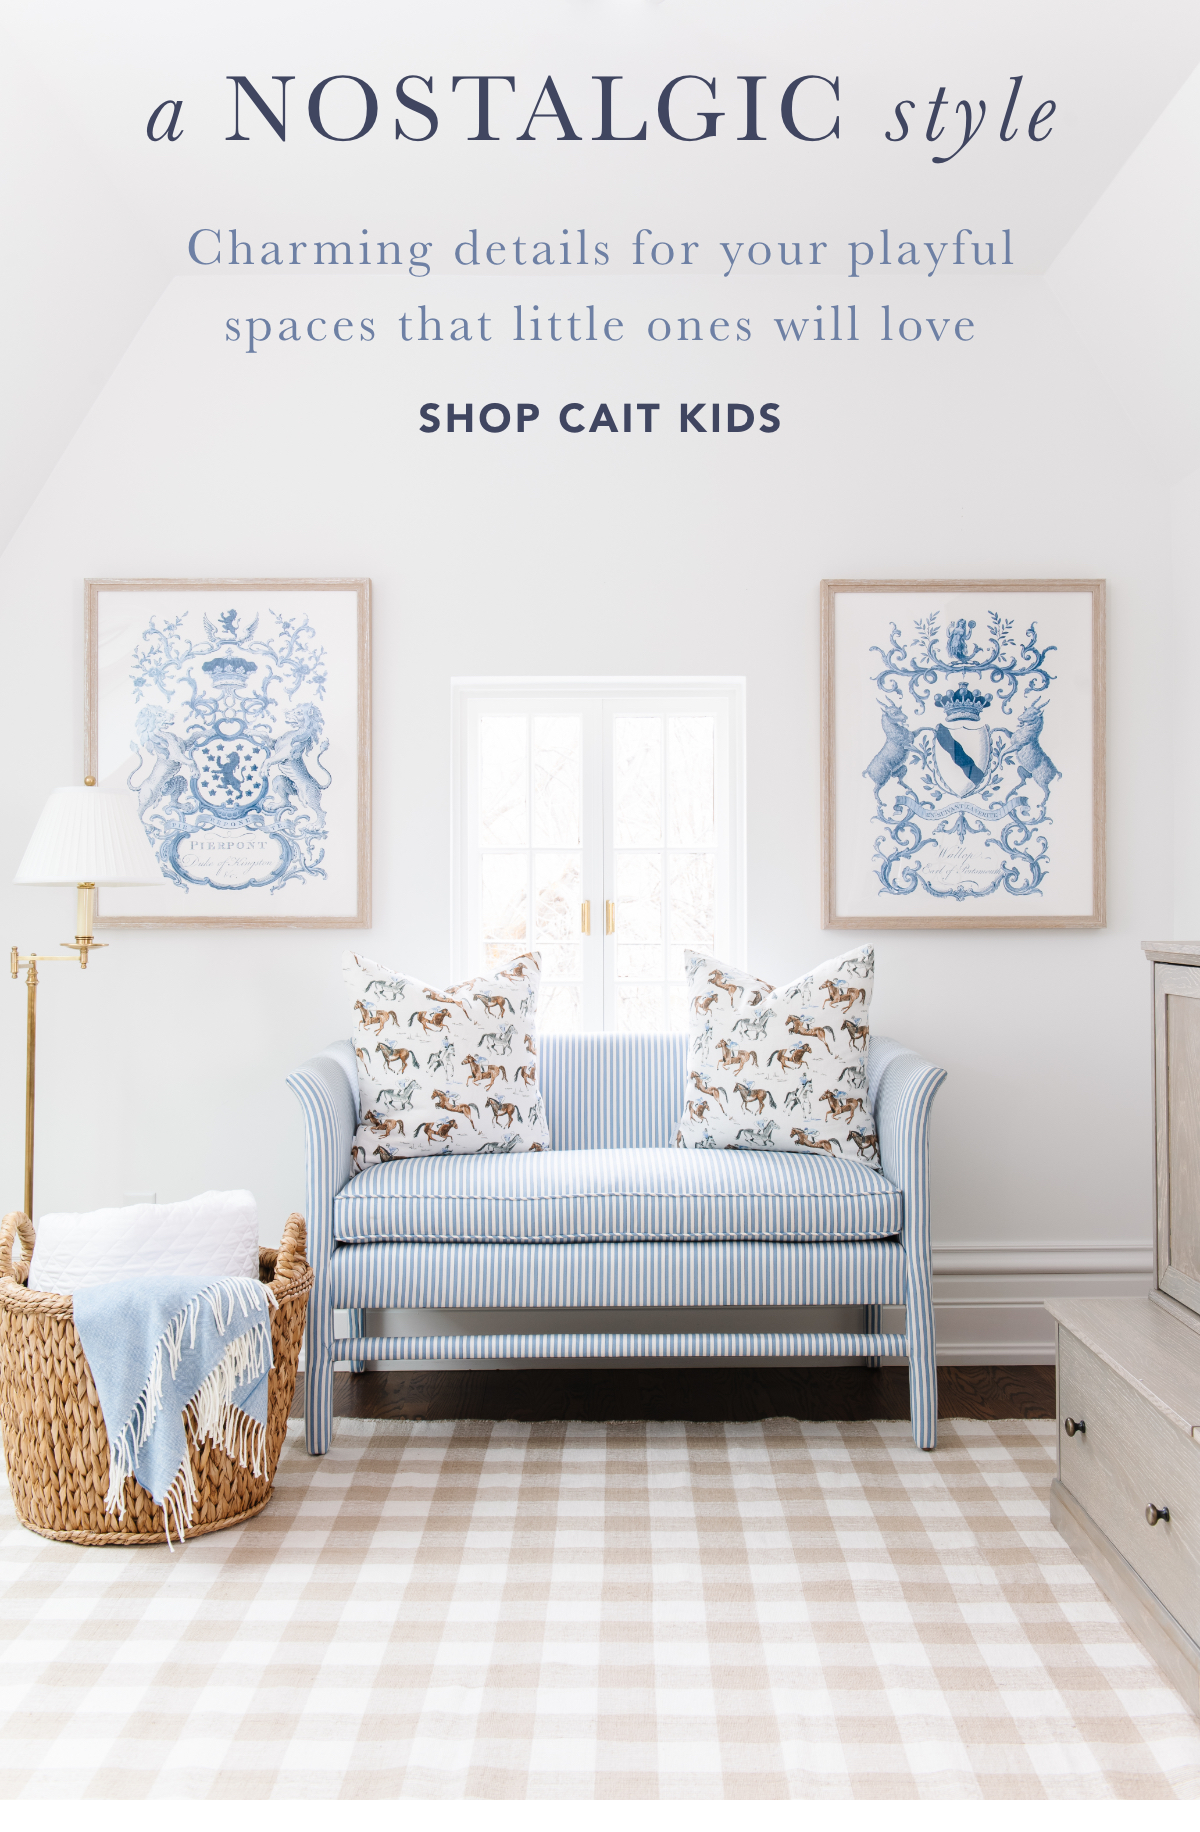 A Nostalgic Style. Charming details for your playful spaces that little ones will love.